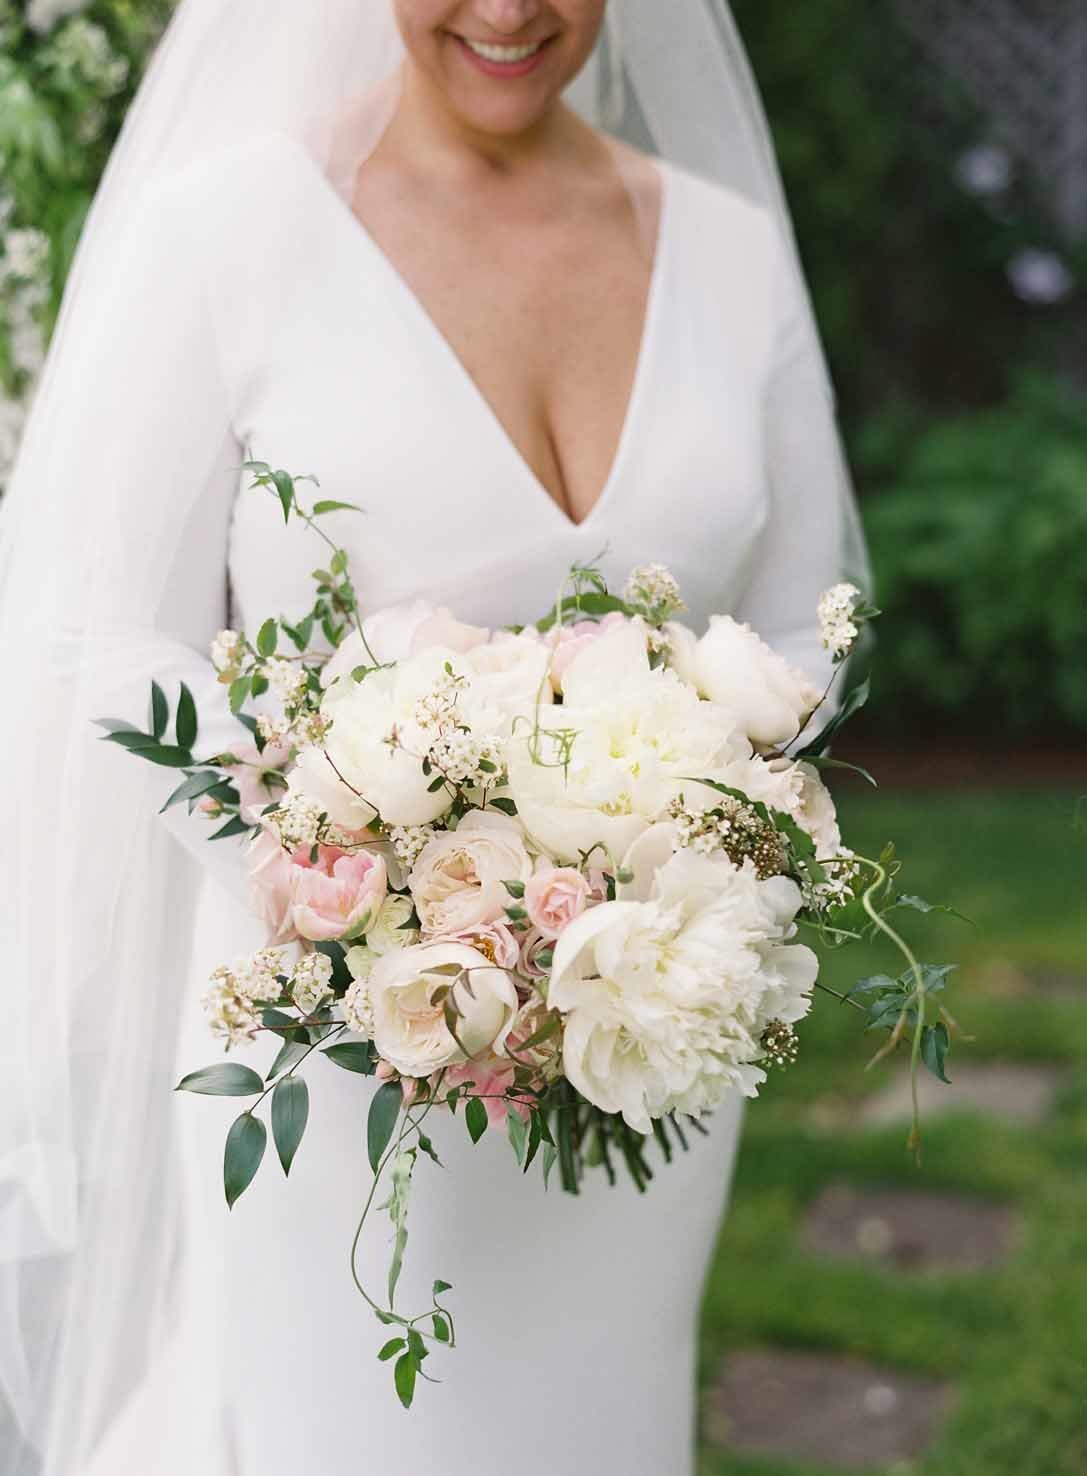 lush garden-style bouquet of white peonies, blush roses, and clematis greenery